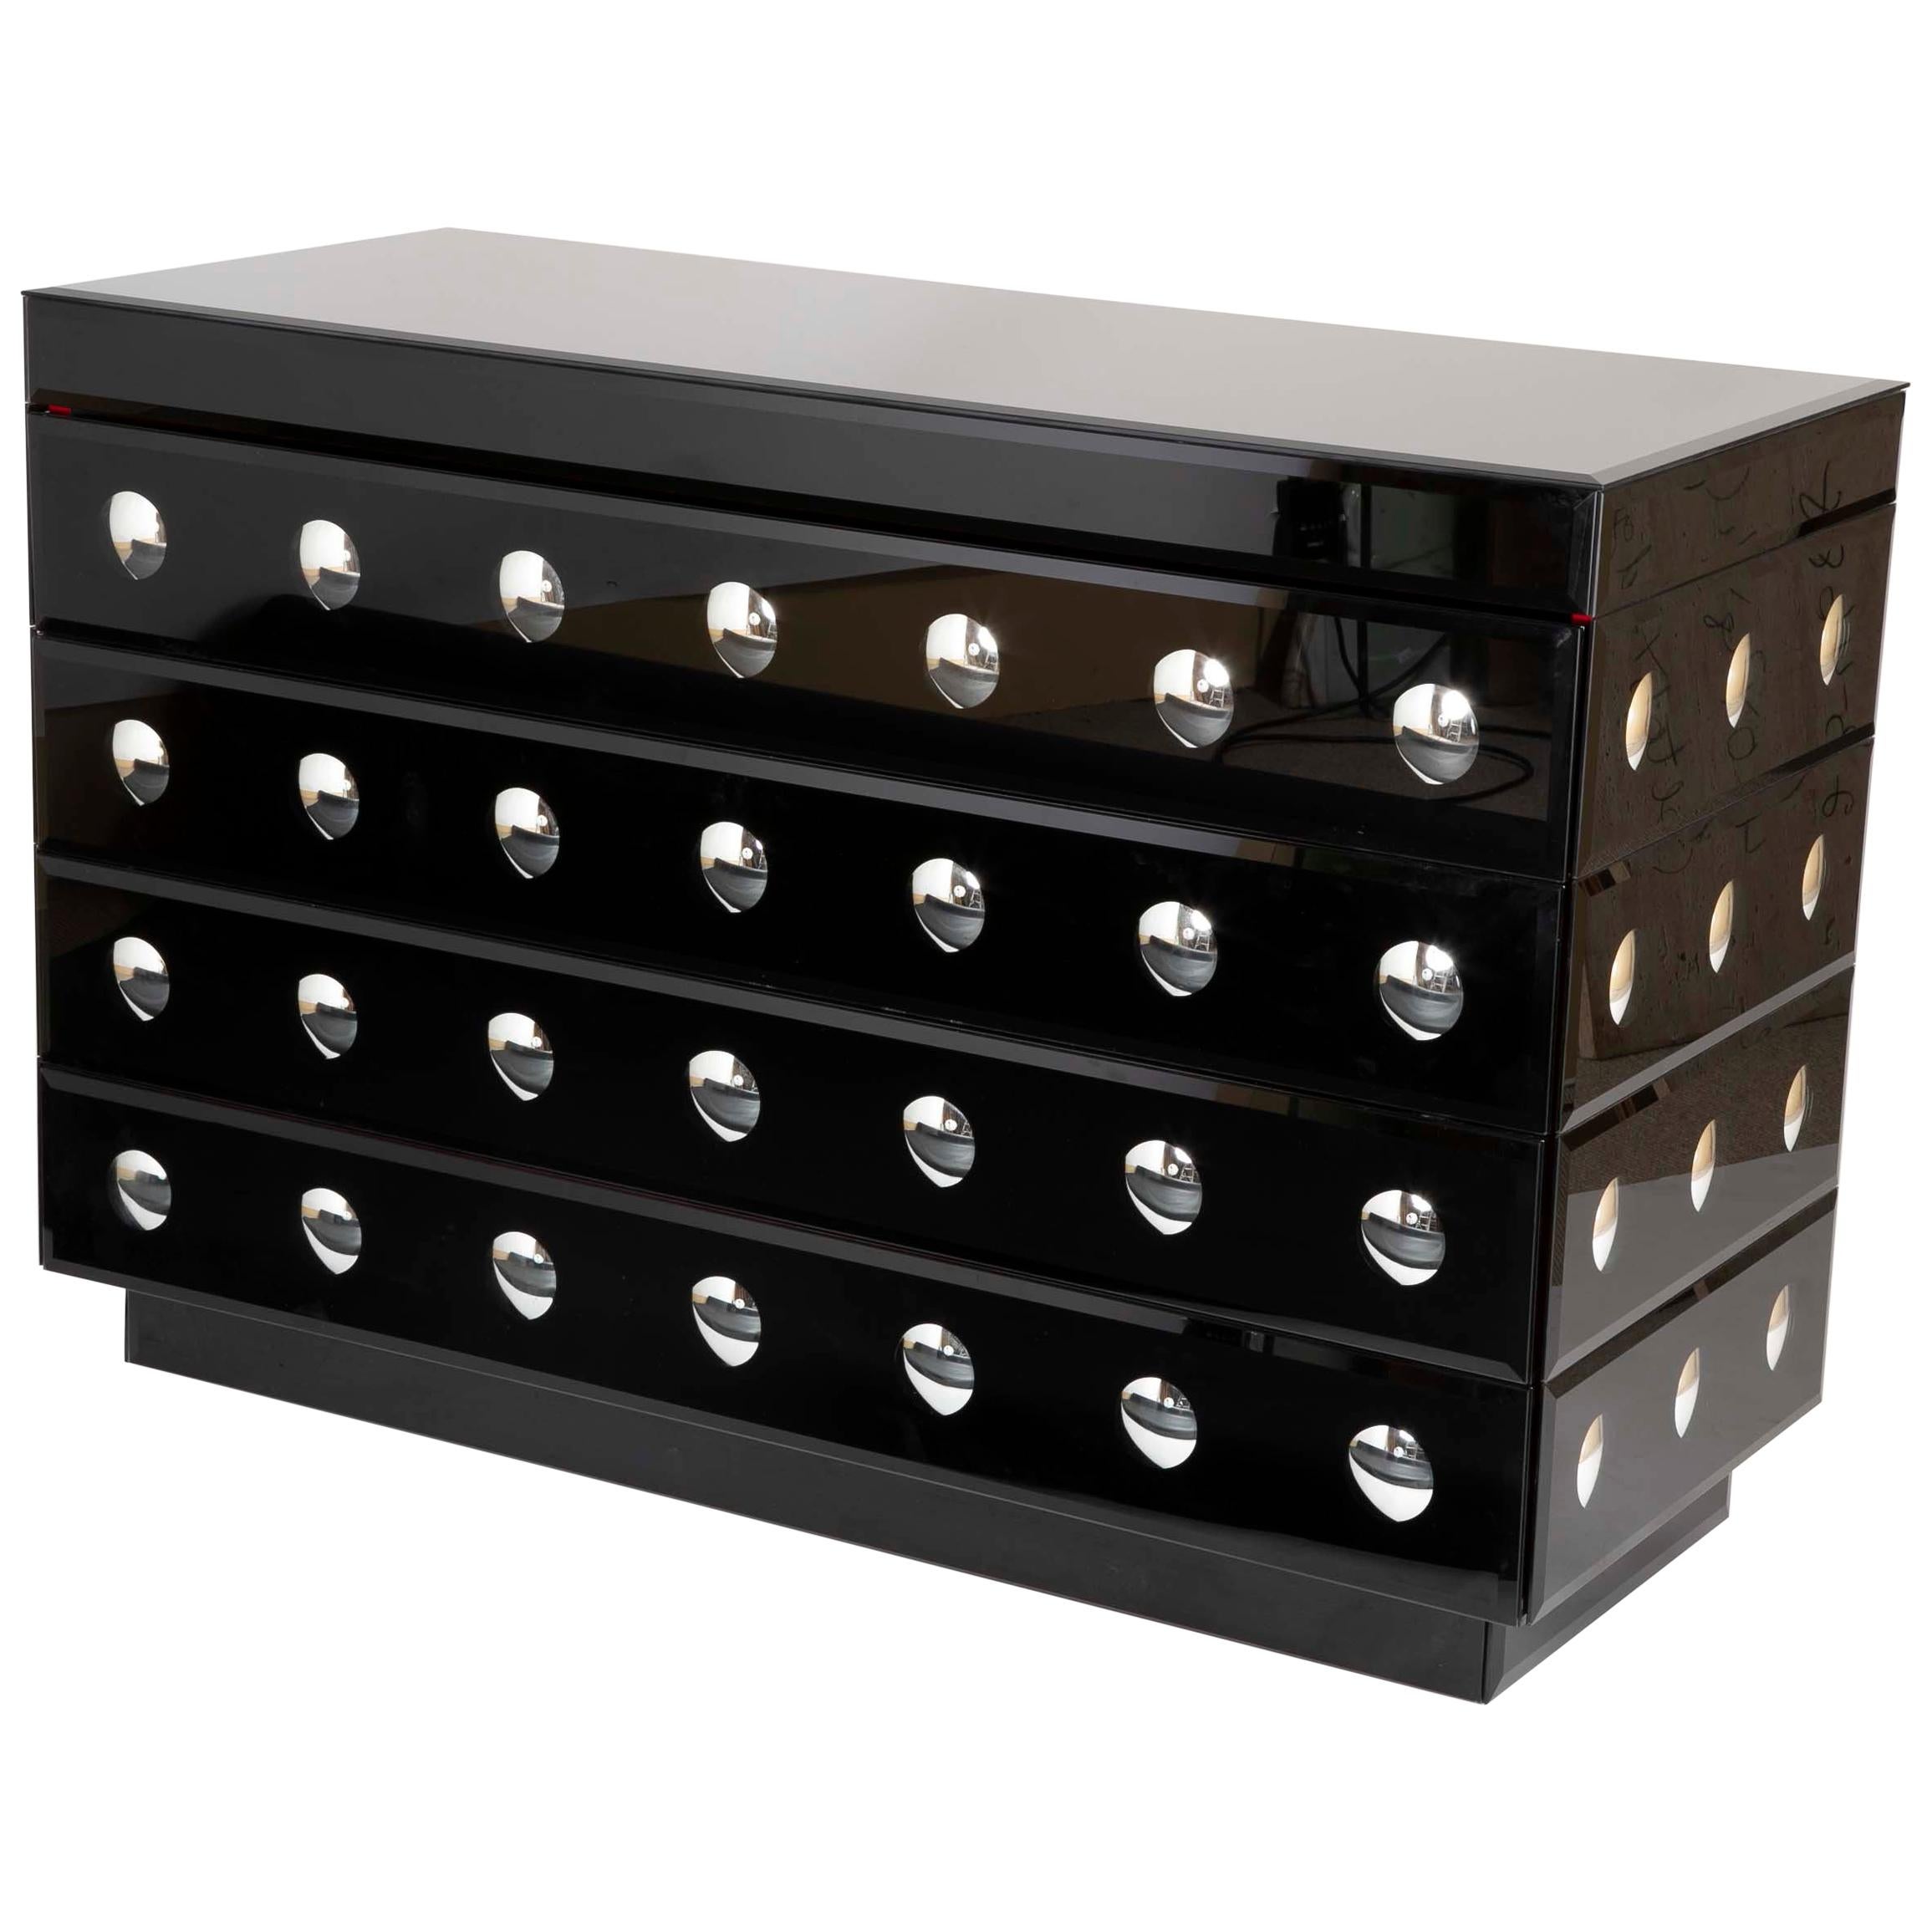 Chest of Drawers from the Firm of Alberto Pinto